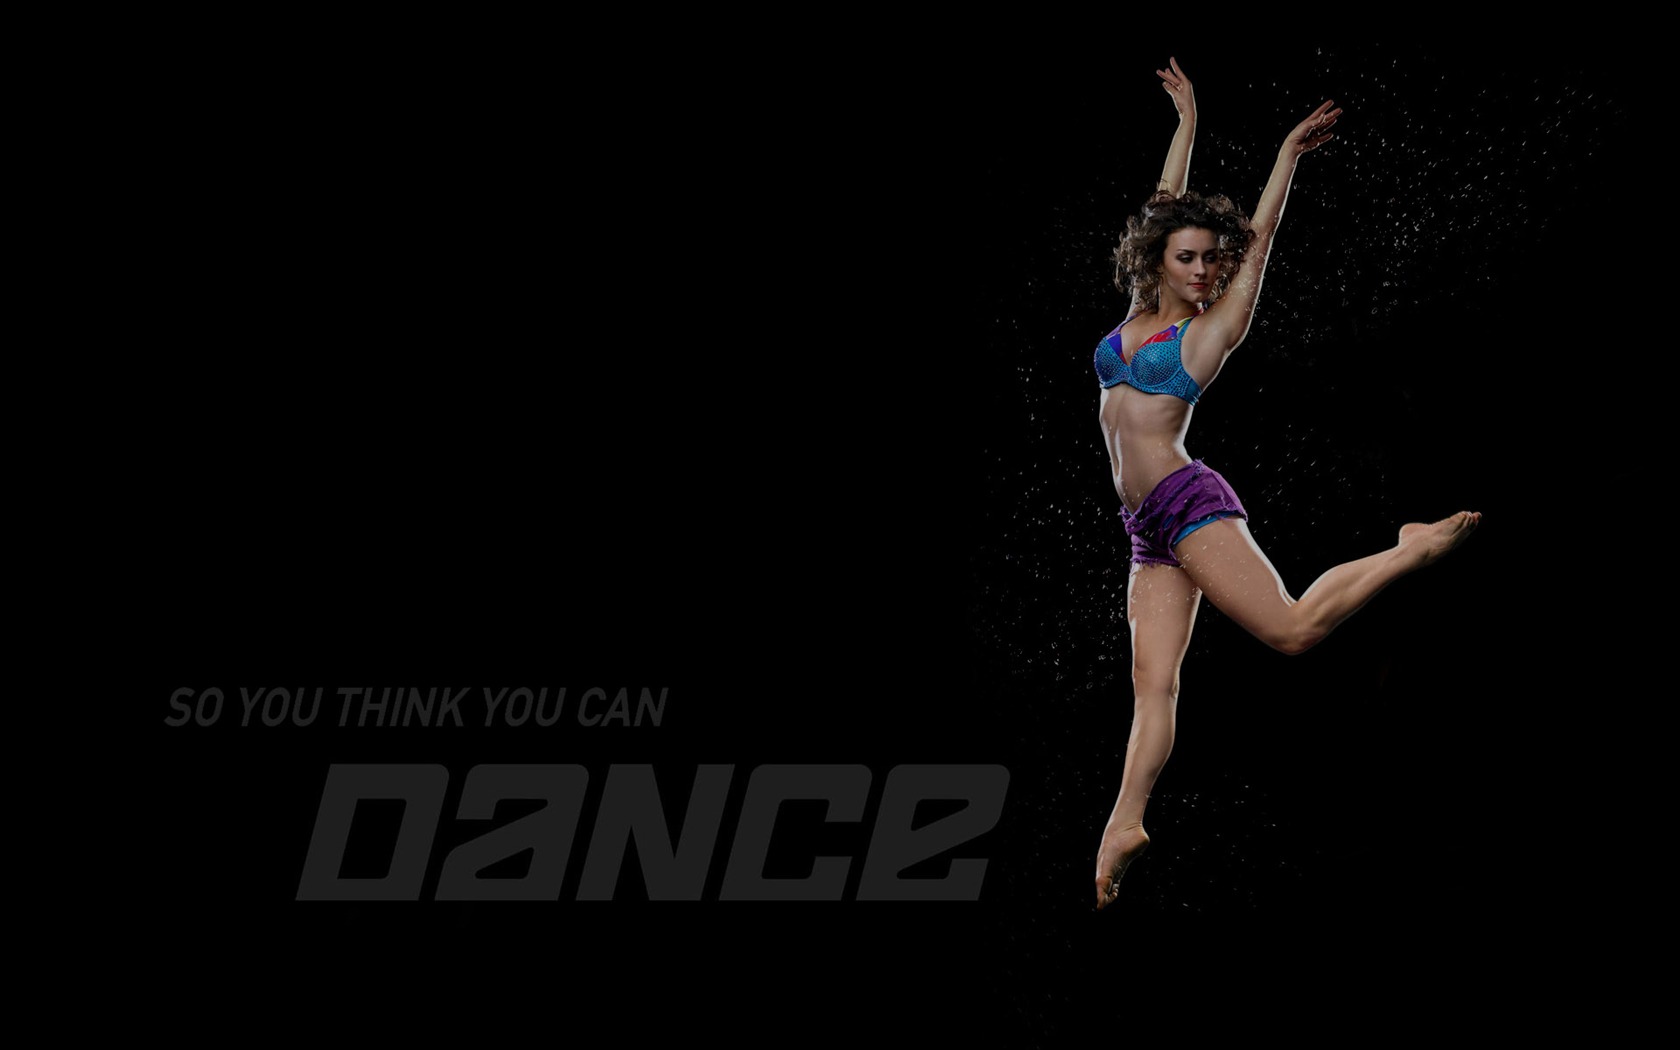 So You Think You Can Dance 舞林争霸 壁纸(二)5 - 1680x1050